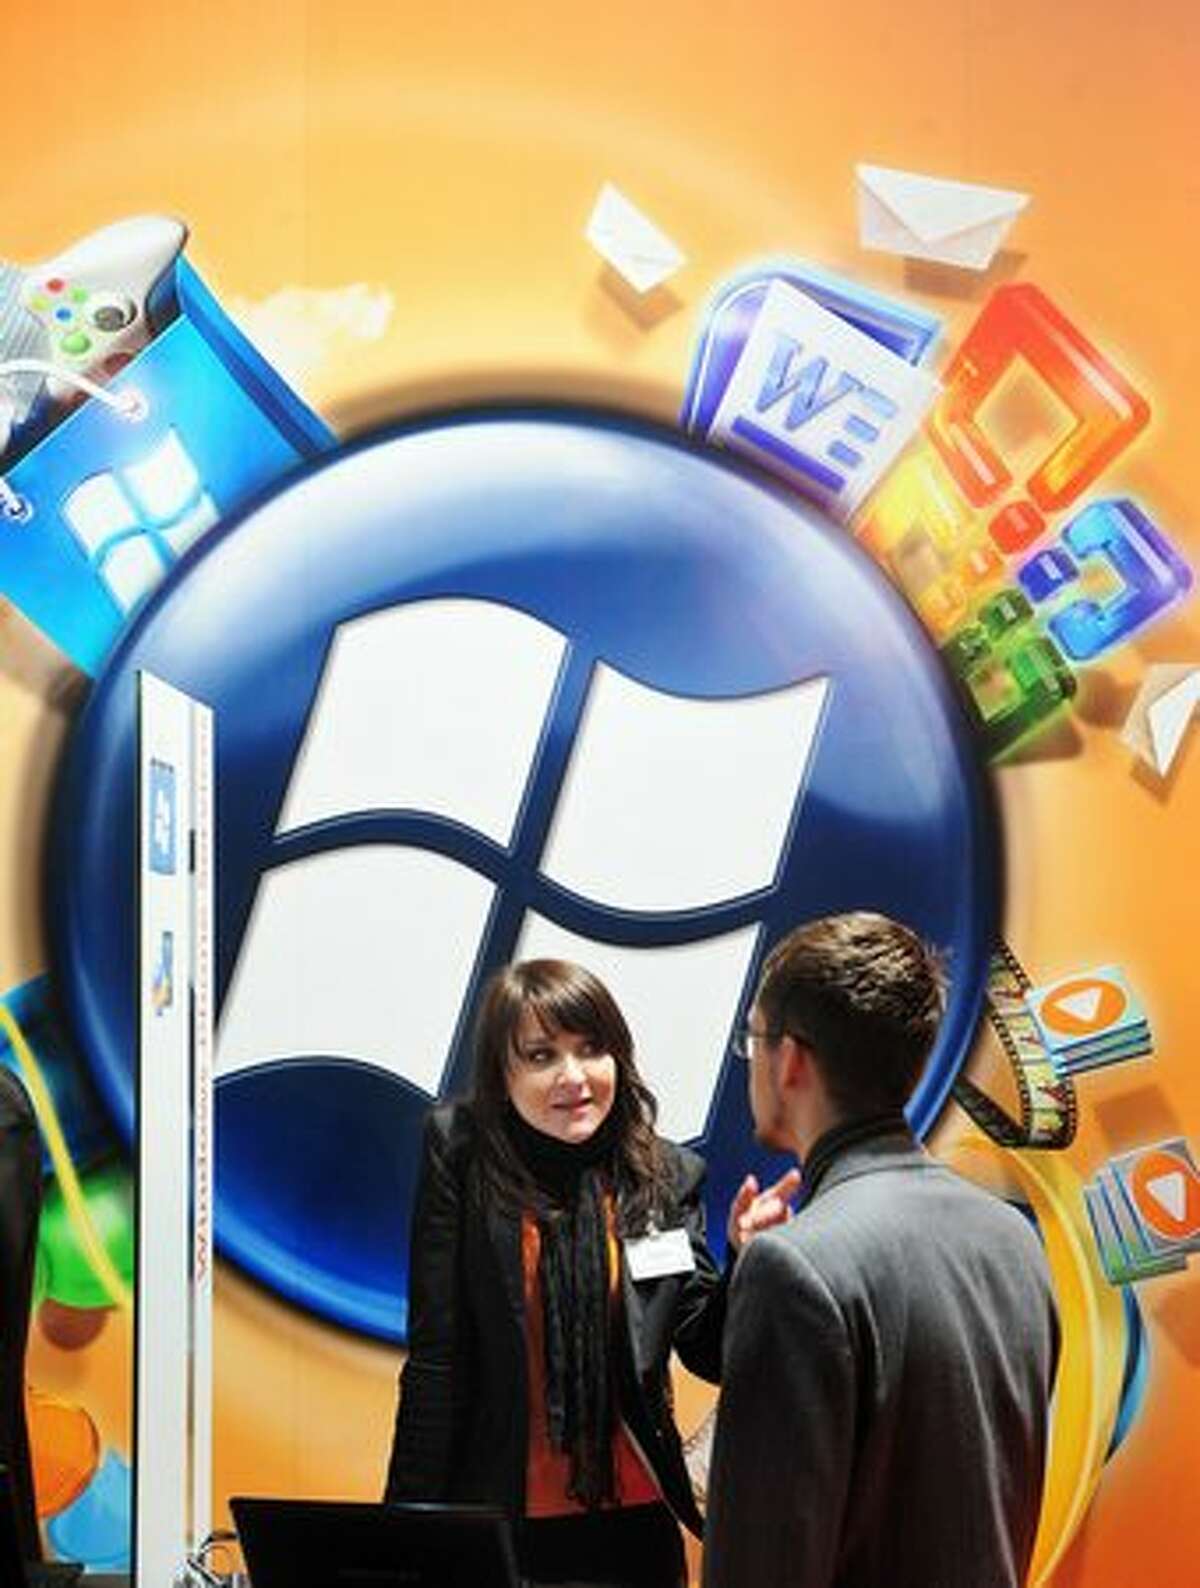 An exhibitor talks to a visitor at the Microsoft stand at the world's biggest high-tech fair, the CeBIT, on March 4, 2010, in Hannover, Germany.